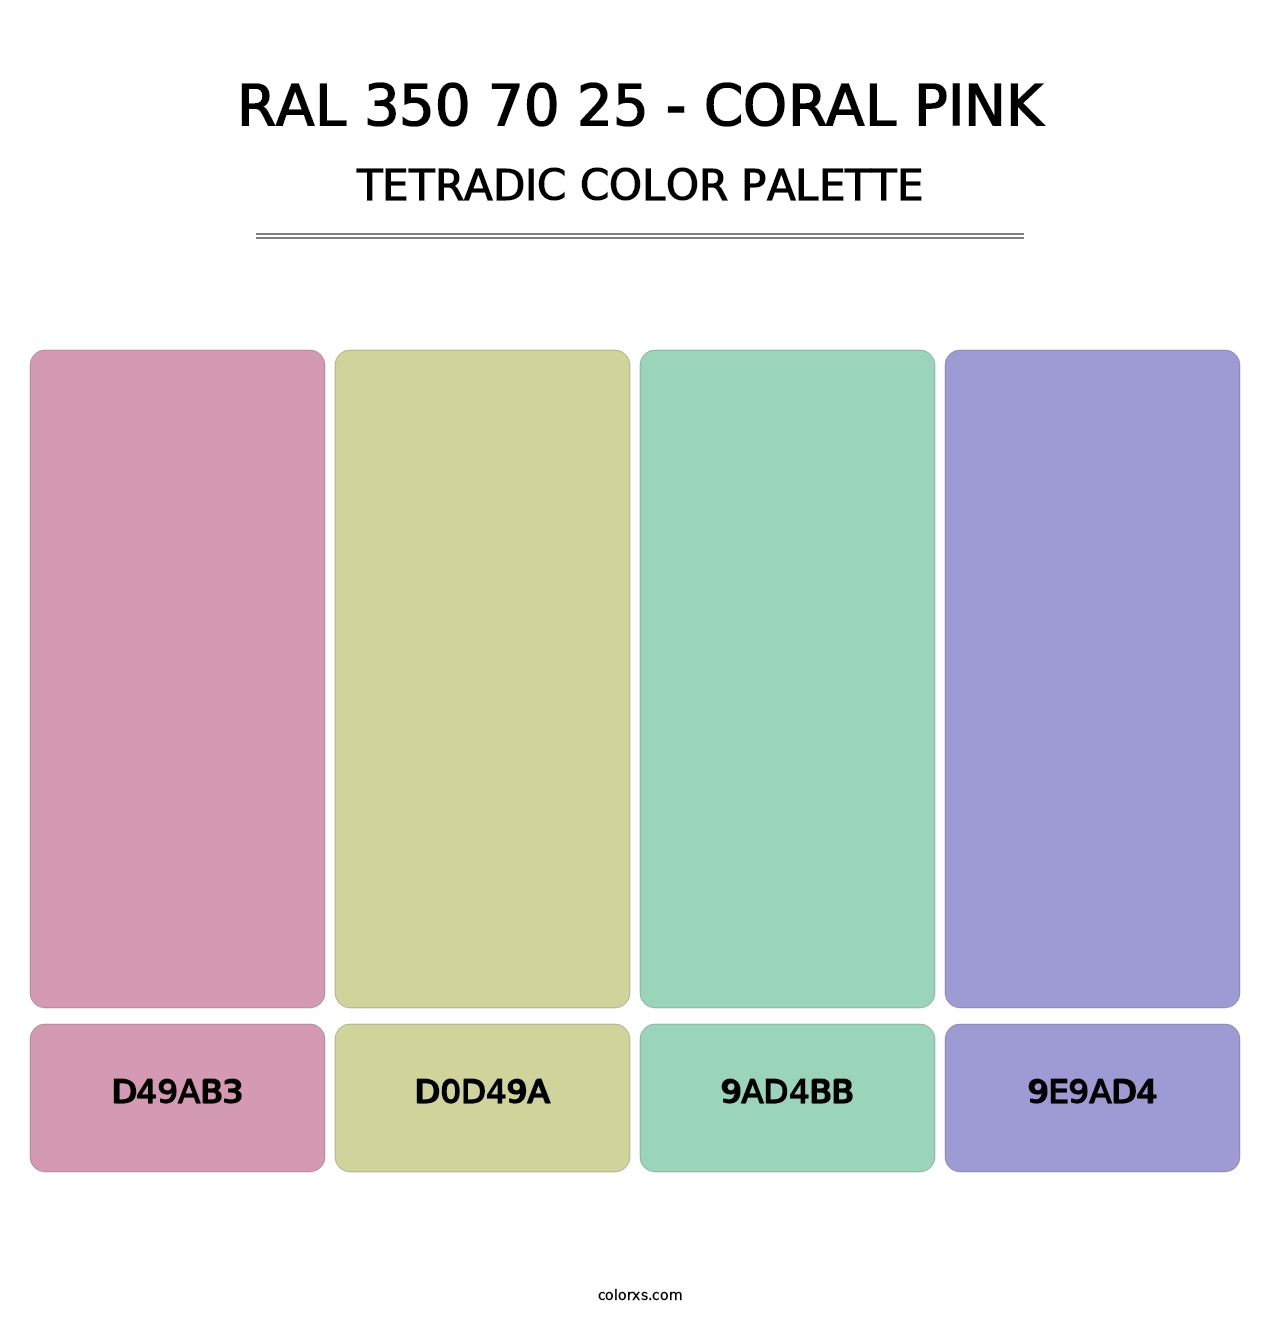 RAL 350 70 25 - Coral Pink - Tetradic Color Palette